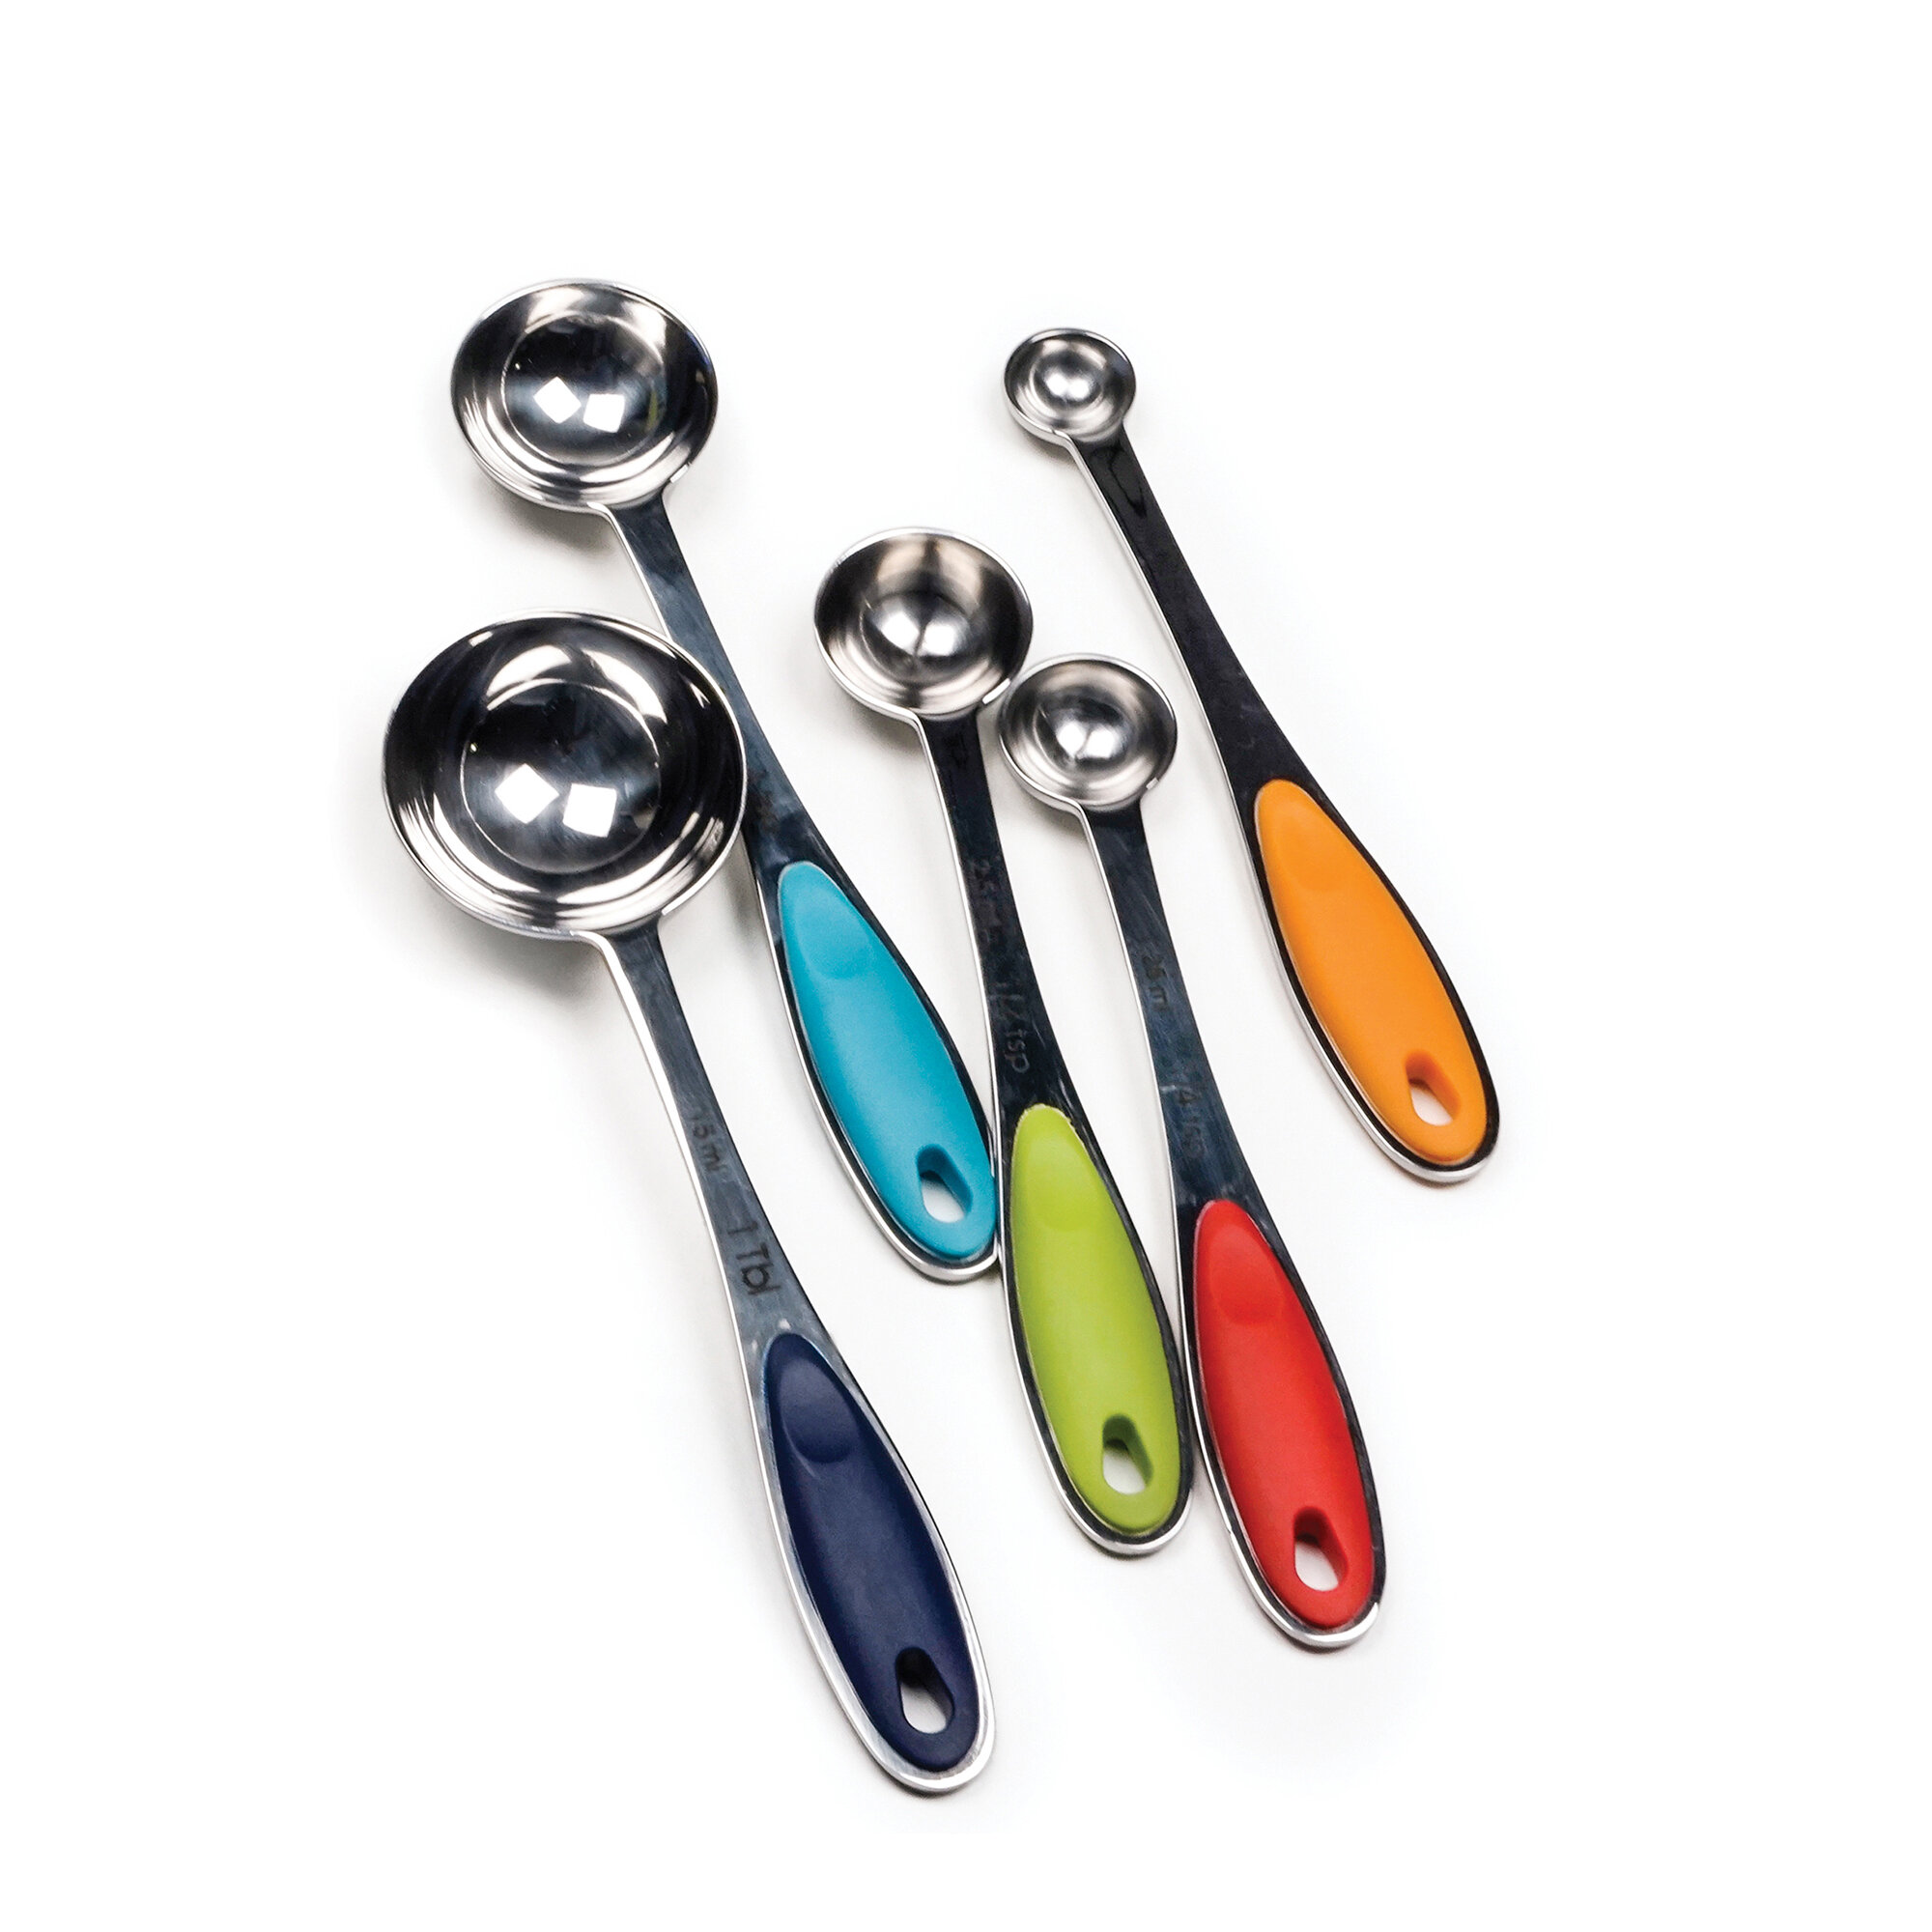 Amco Stainless Steel 6 Piece Measuring Spoon Set